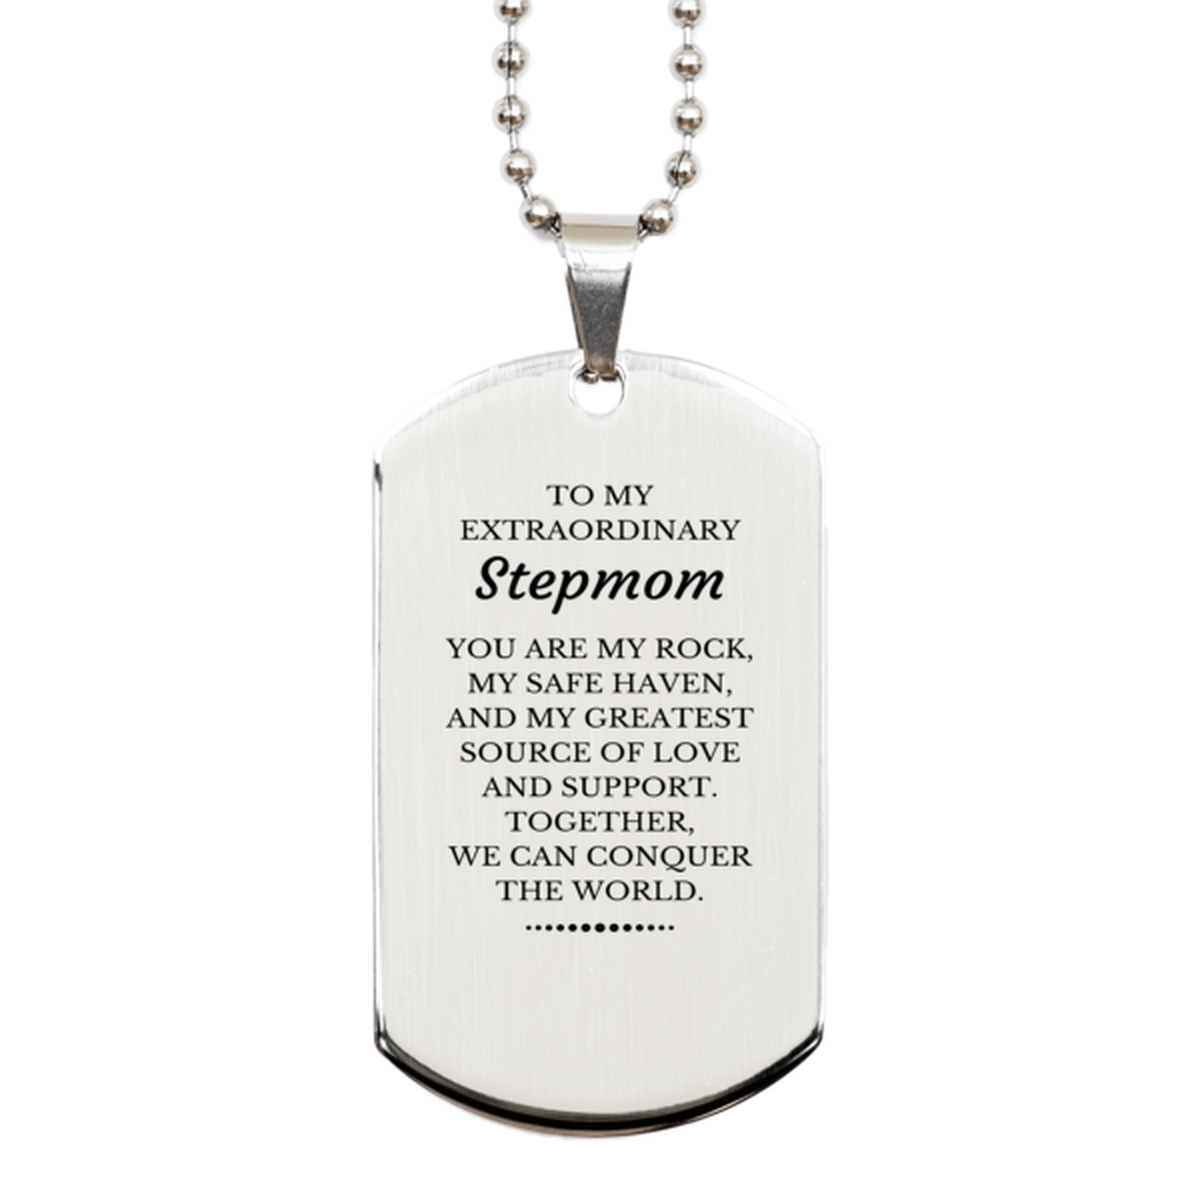 To My Extraordinary Stepmom Gifts, Together, we can conquer the world, Birthday Silver Dog Tag For Stepmom, Christmas Gifts For Stepmom